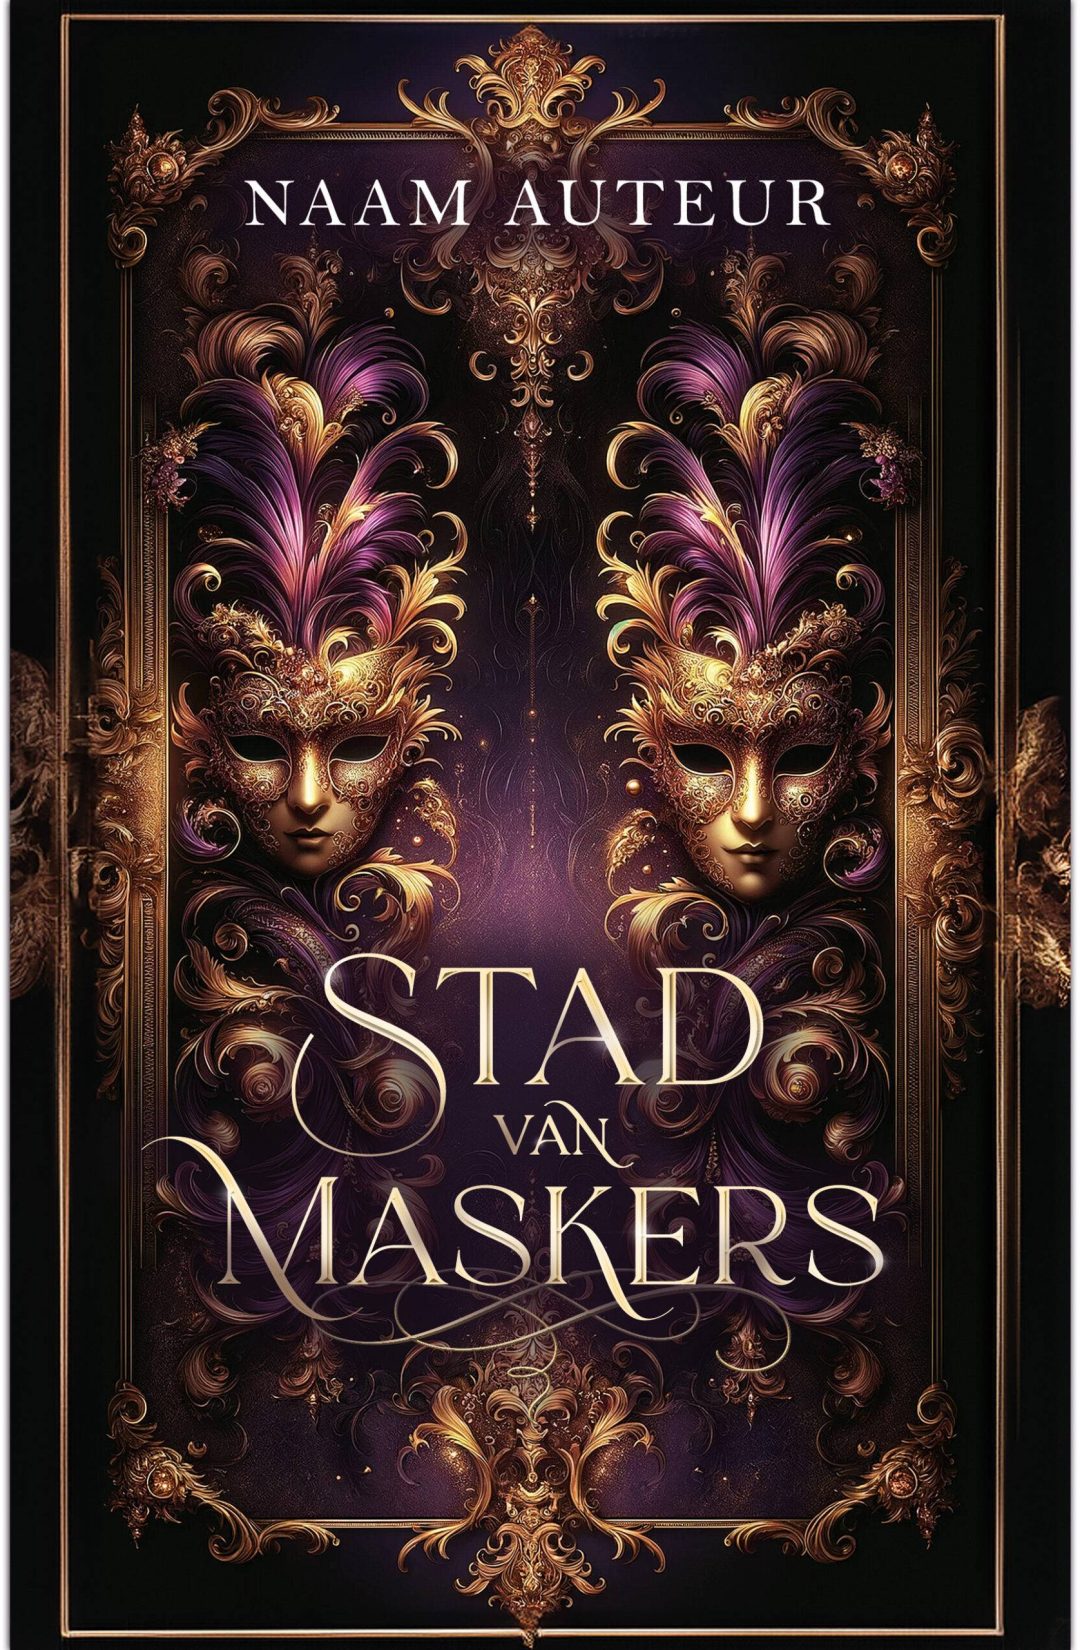 Stad van maskers front real size